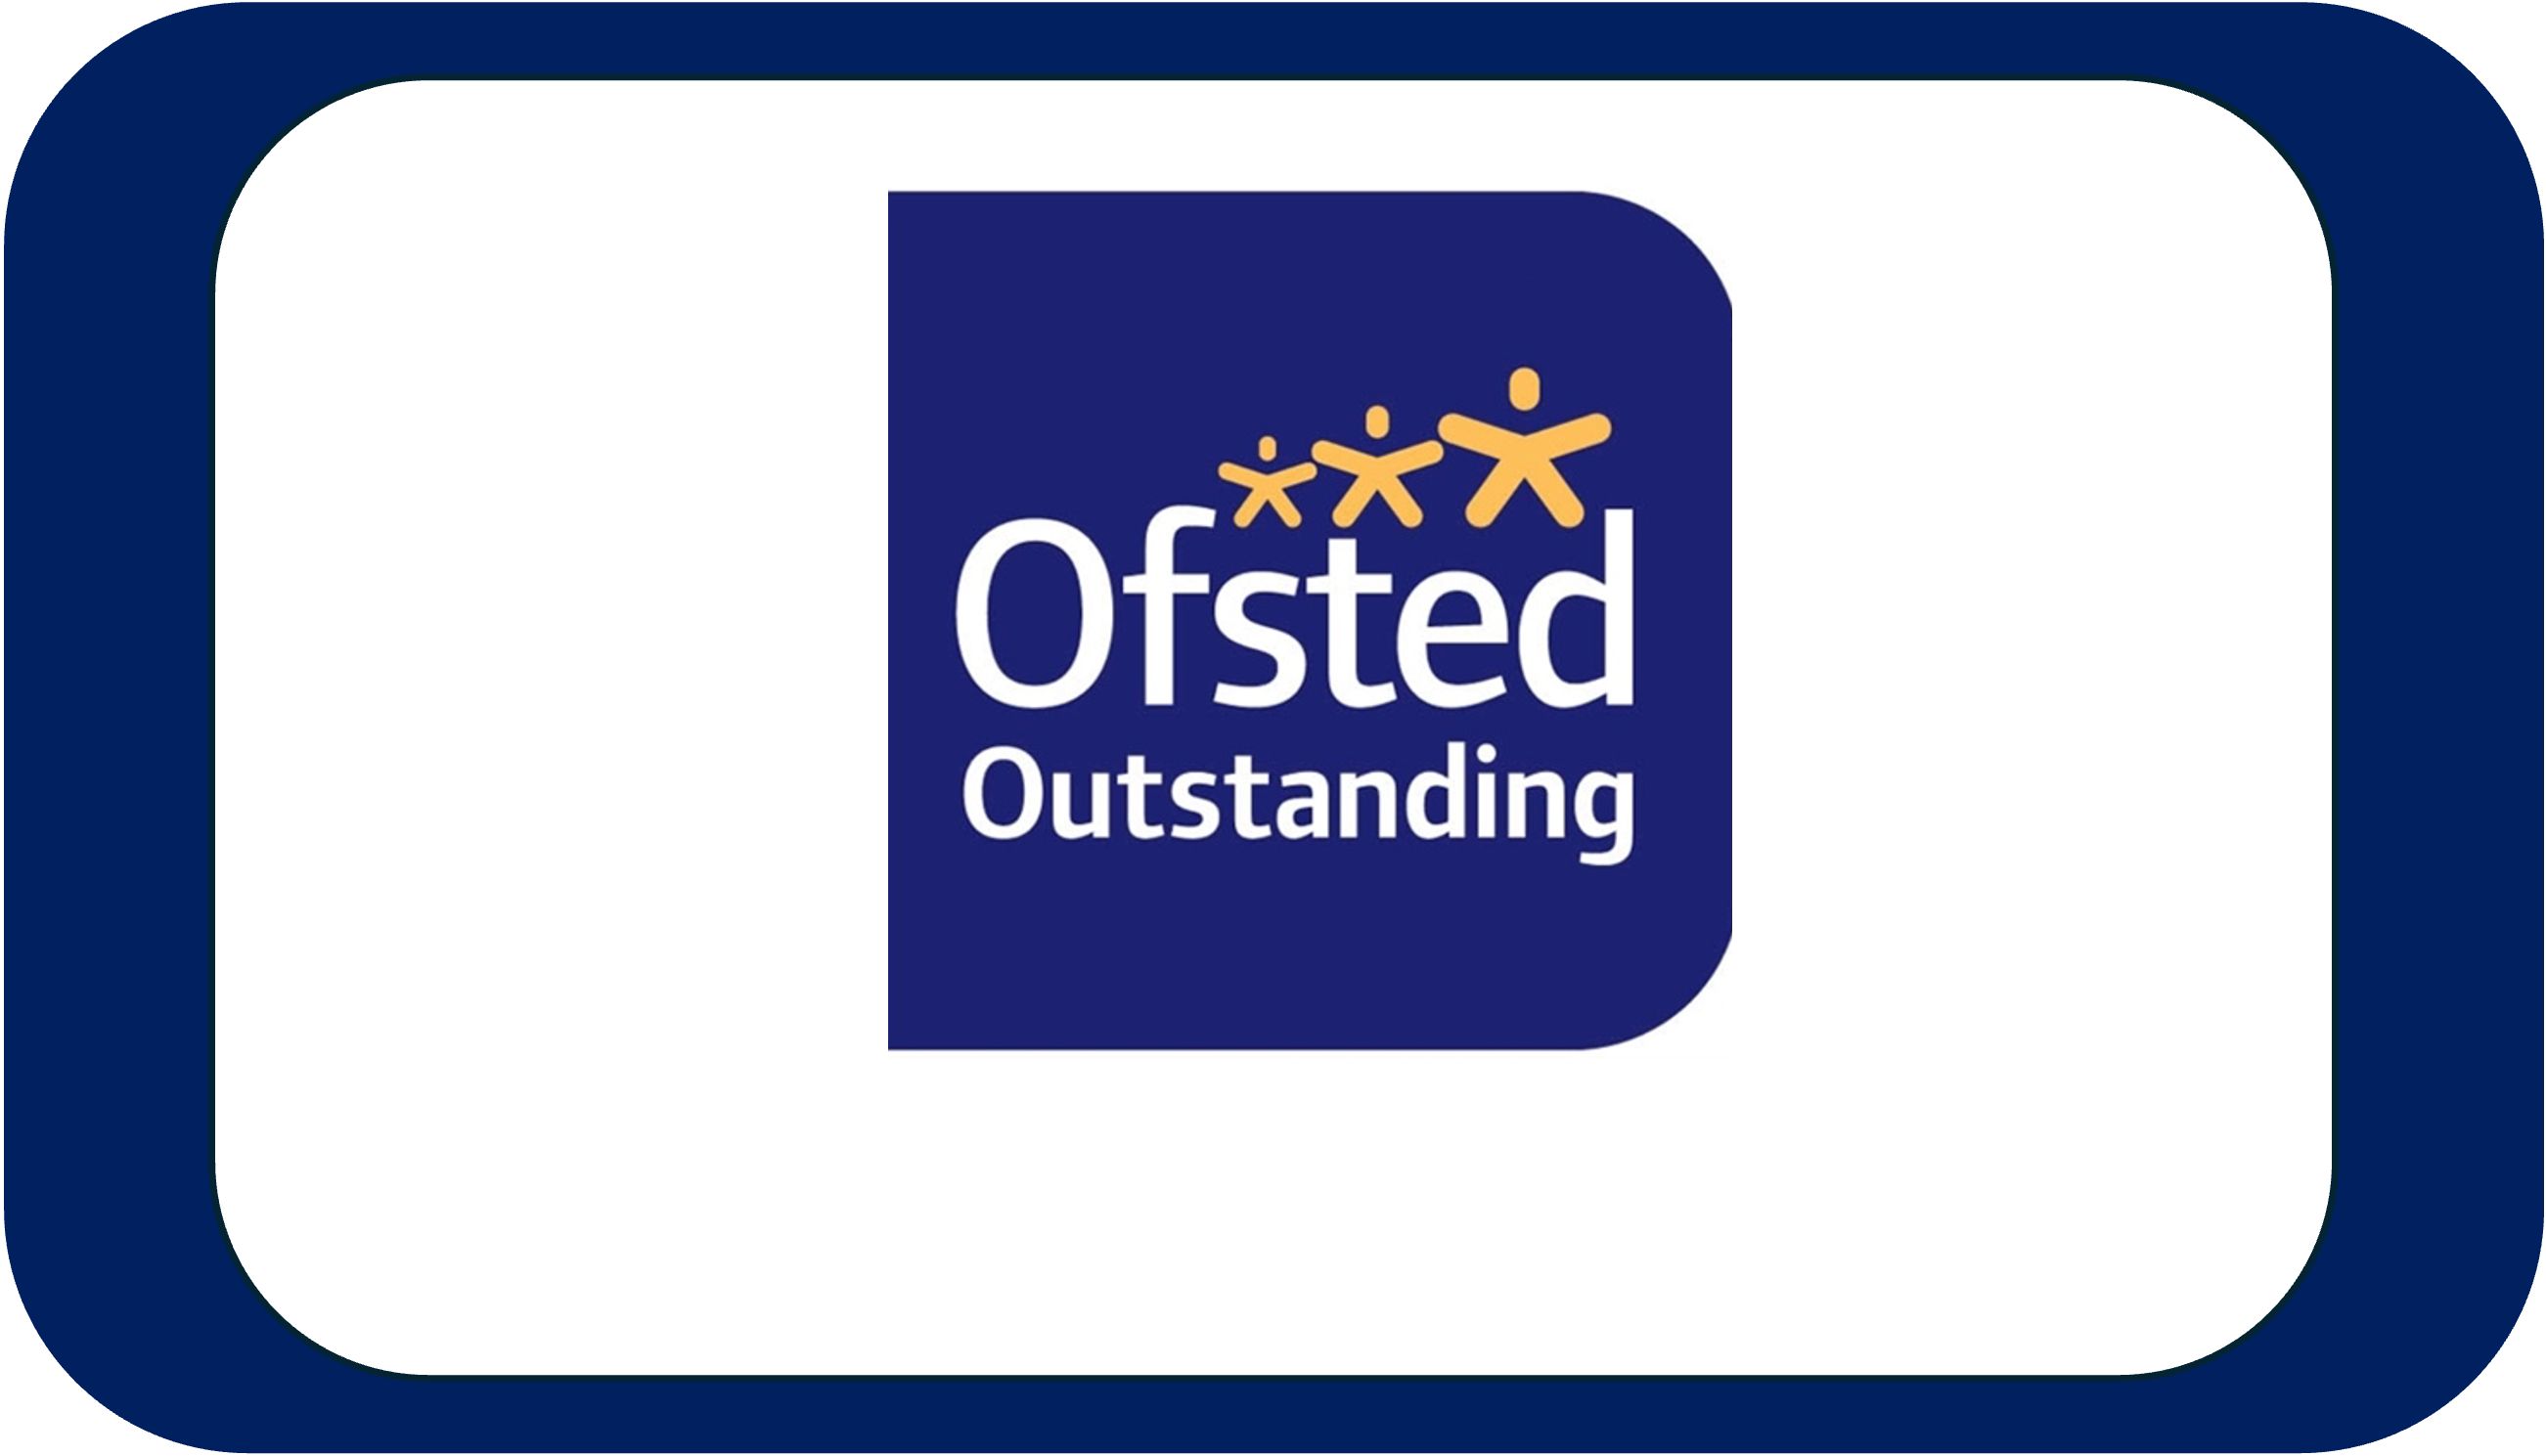 Ofsted 2018